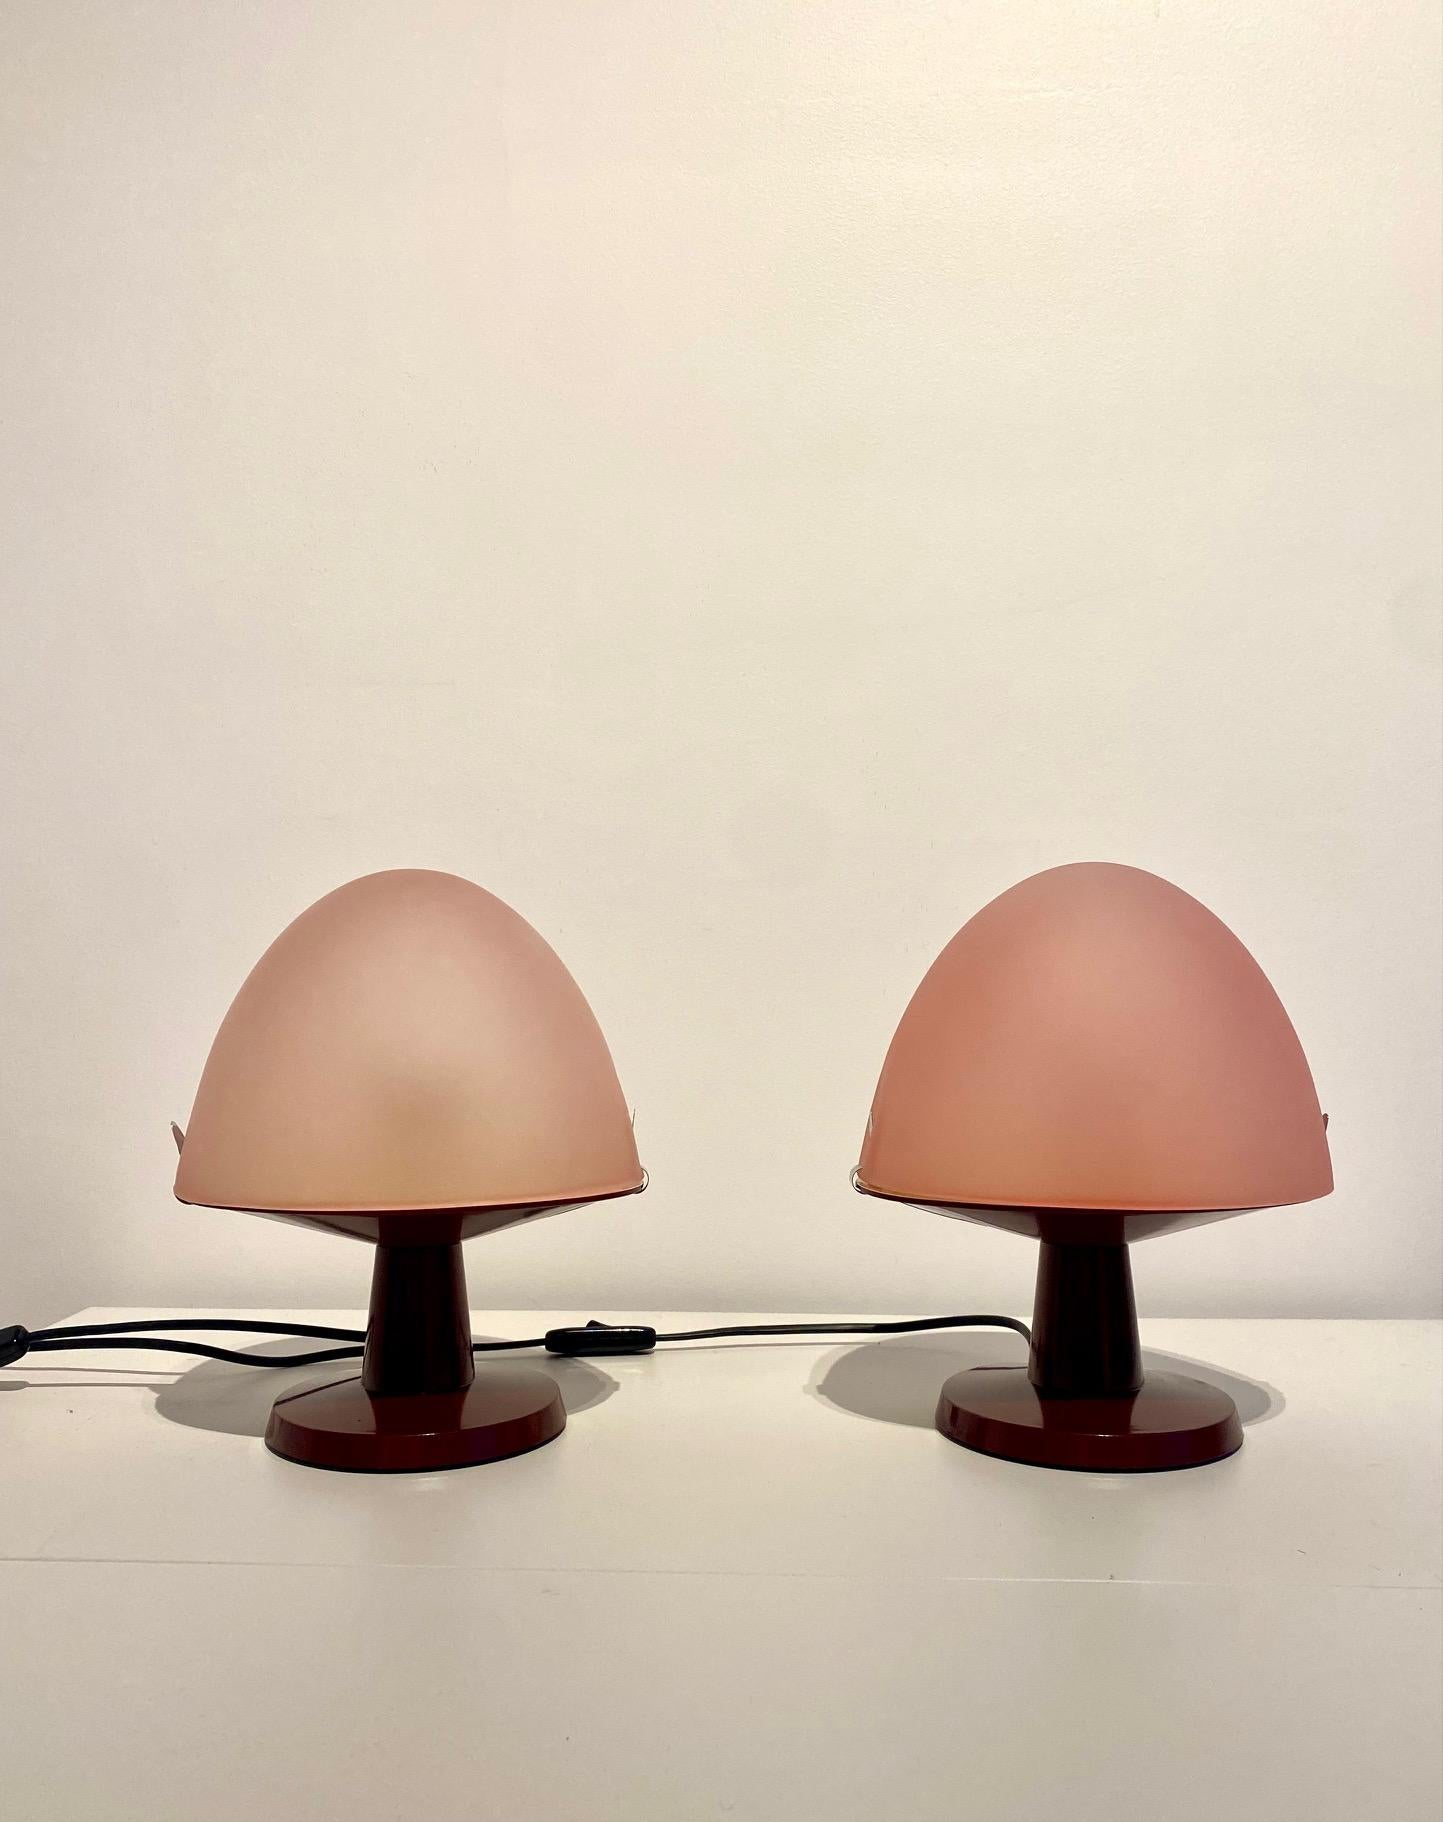 Italian Dolly Lamps by Franco Mirenzi for Valenti Luce, 1970s, Set of 2 For Sale